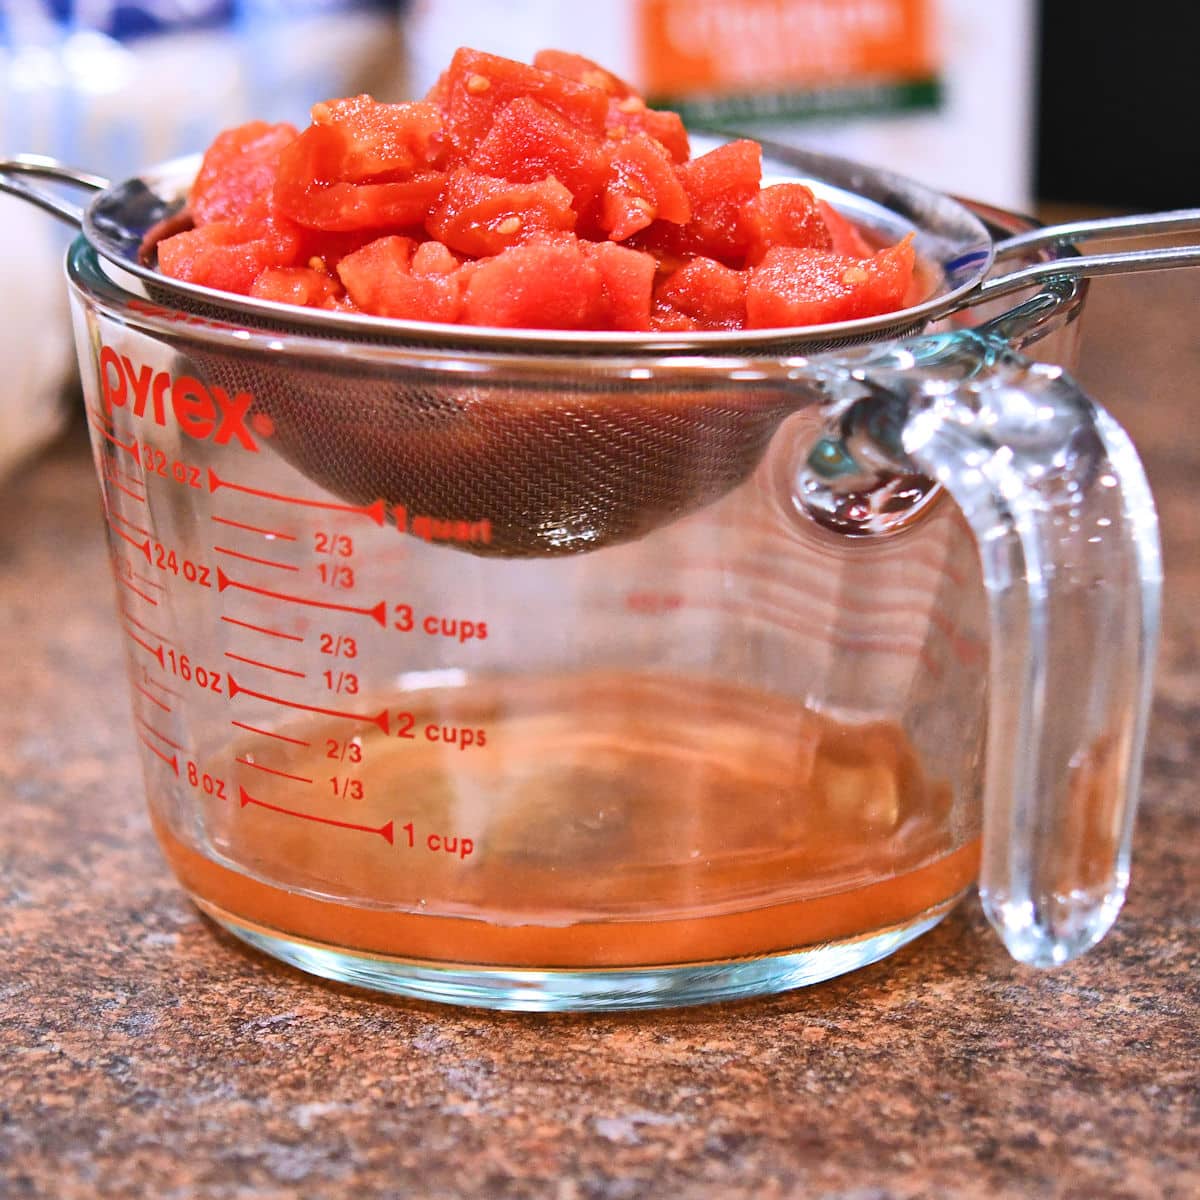 Diced tomatoes being strained over a glass measuring cup.